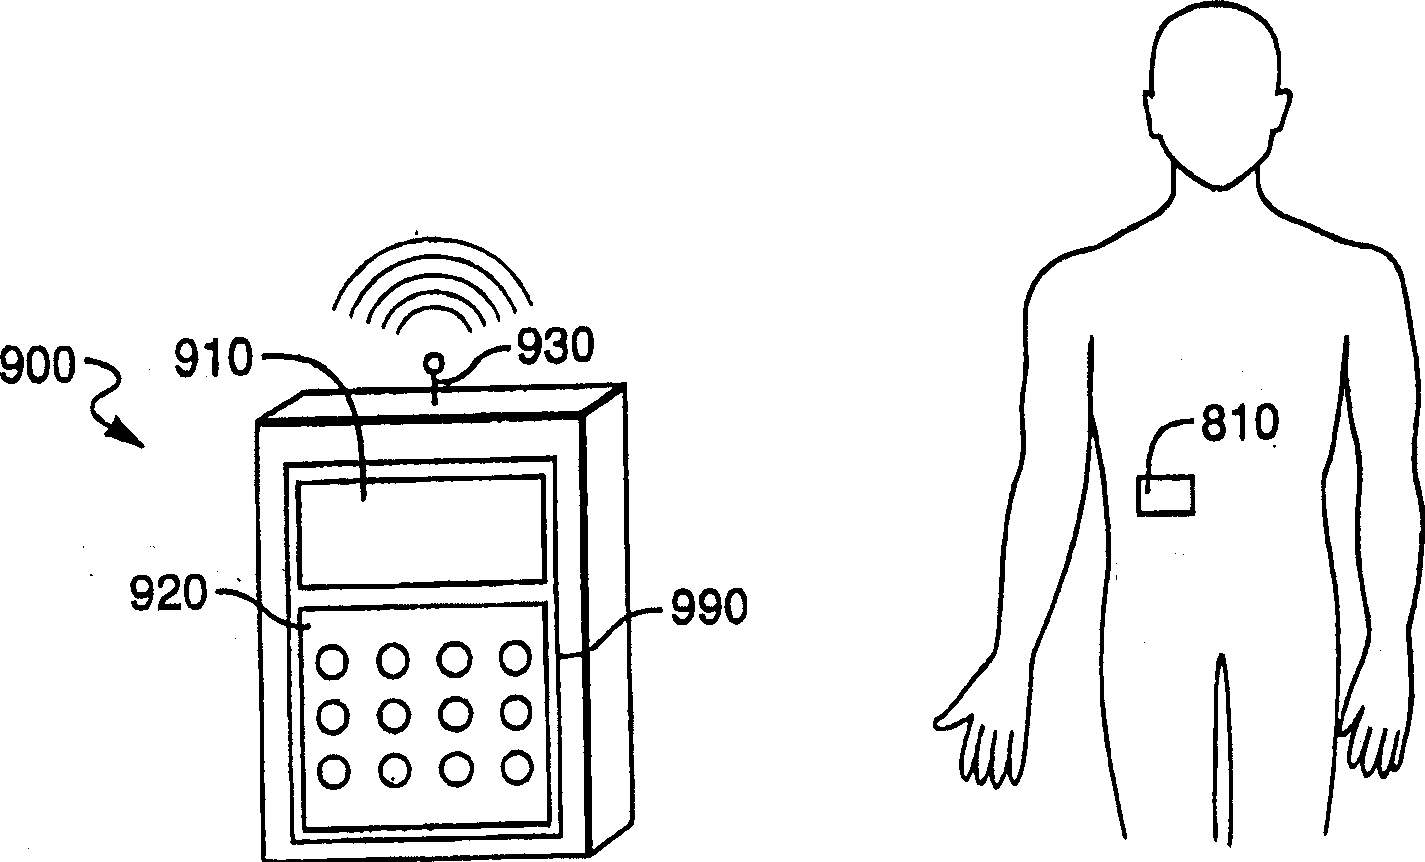 Self-contained, automatic transcutaneous physiologic sensing system